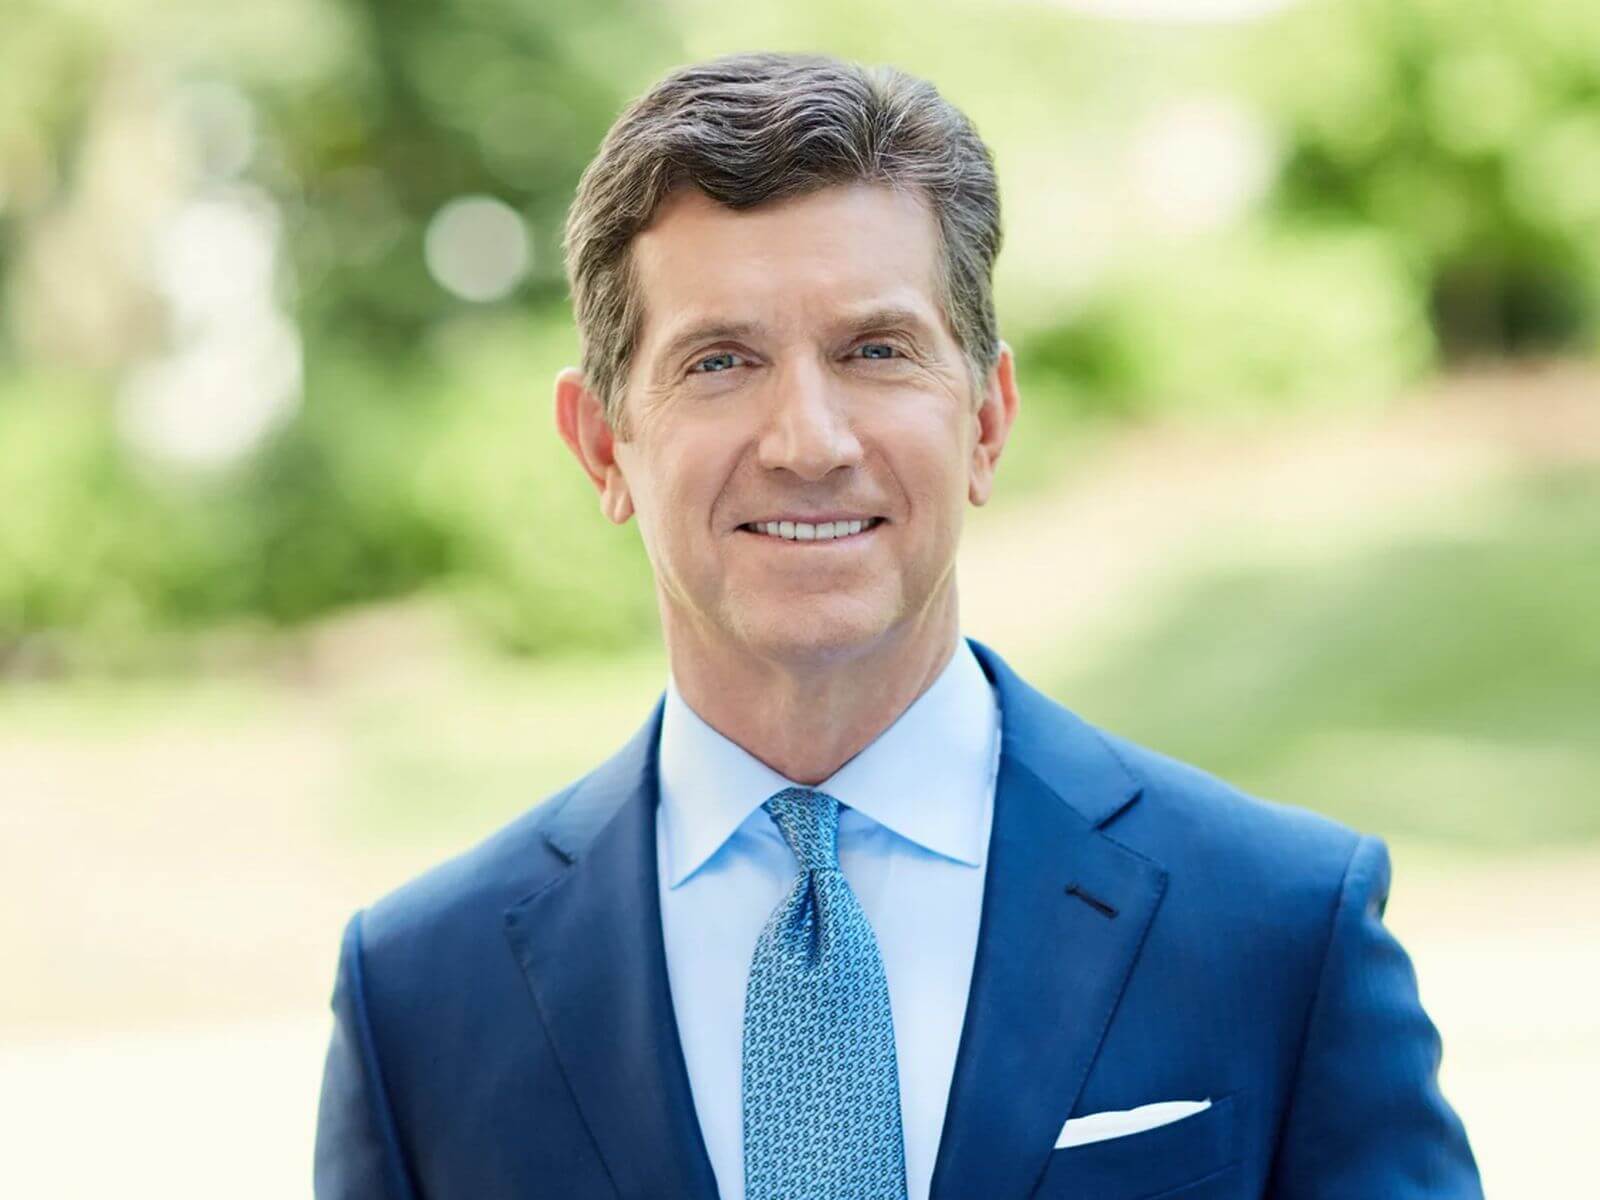 Apple has elected Alex Gorsky